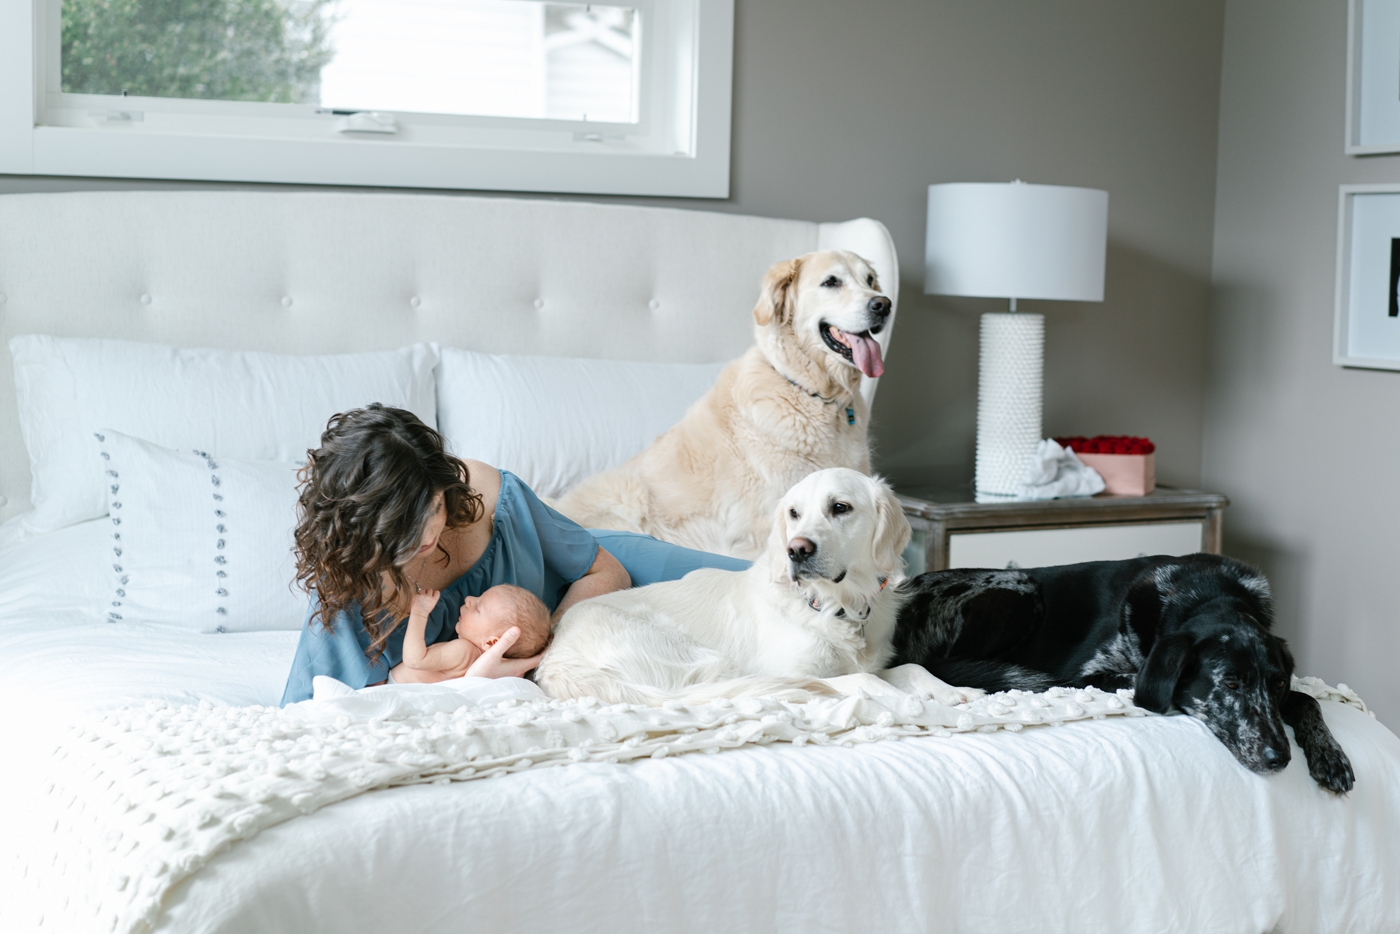 Mom on bed with baby and dogs during in-home lifestyle newborn session. Photo by Lauren Sosler Photography.